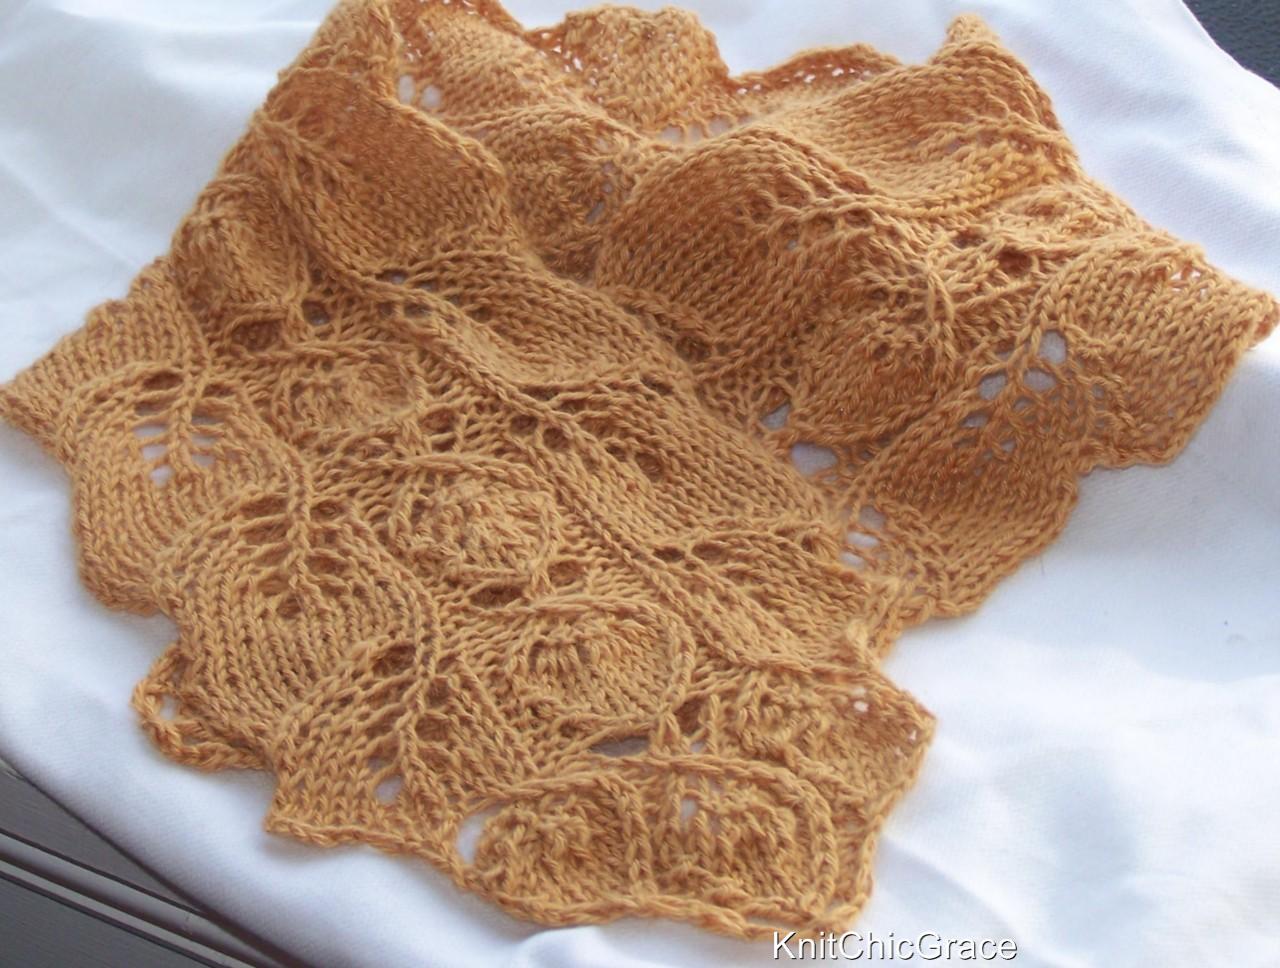 Ravelry: Leaf Lace Scarf pat
tern by Janet D. Russell